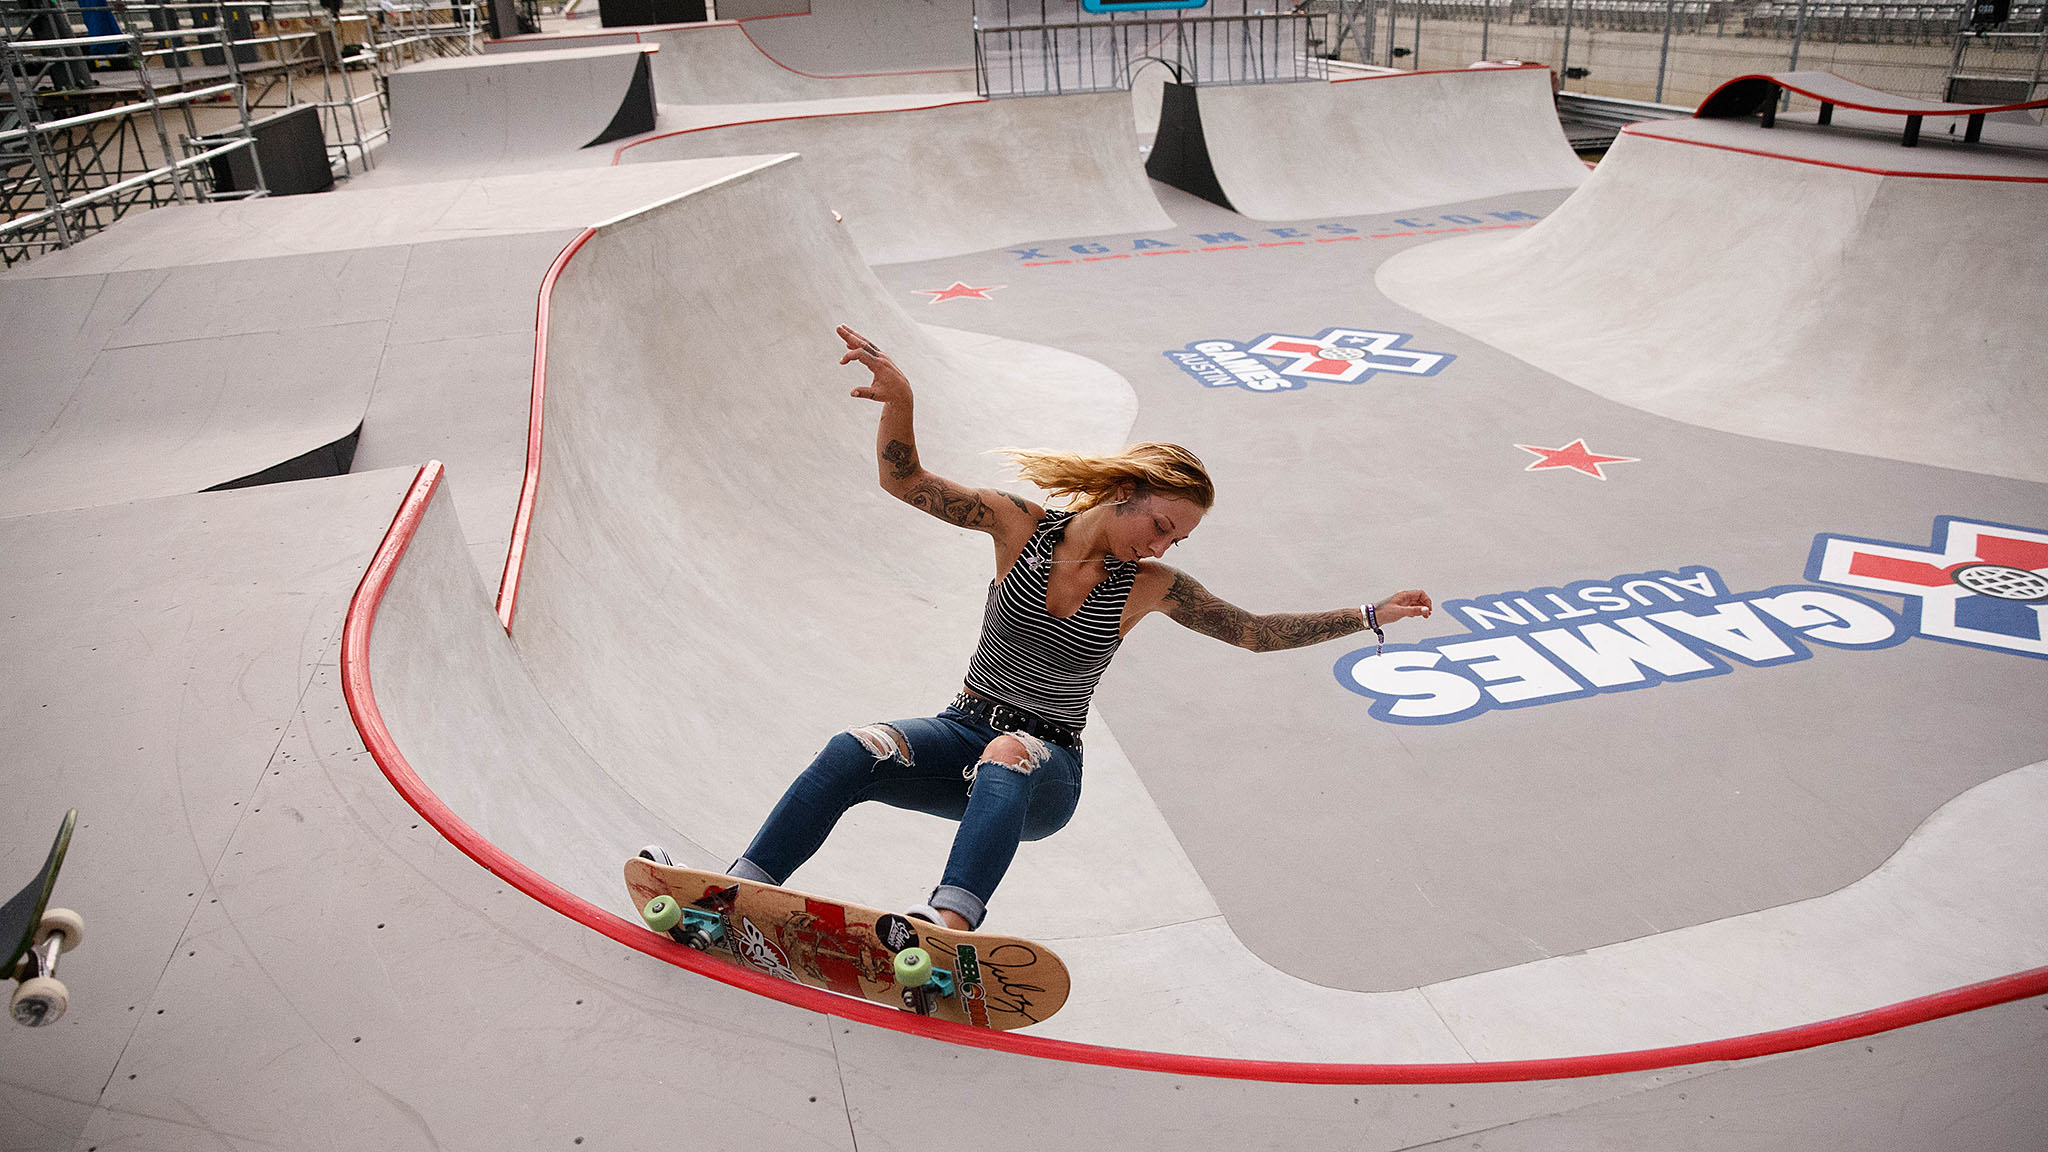 Among the events returning to X Games after a brief hiatus is Women's Skateboard Park, which hasn't been seen since XG Barcelona 2013. Julz Lynn, who won the bronze medal in that event, takes a practice lap in the park course Wednesday afternoon.